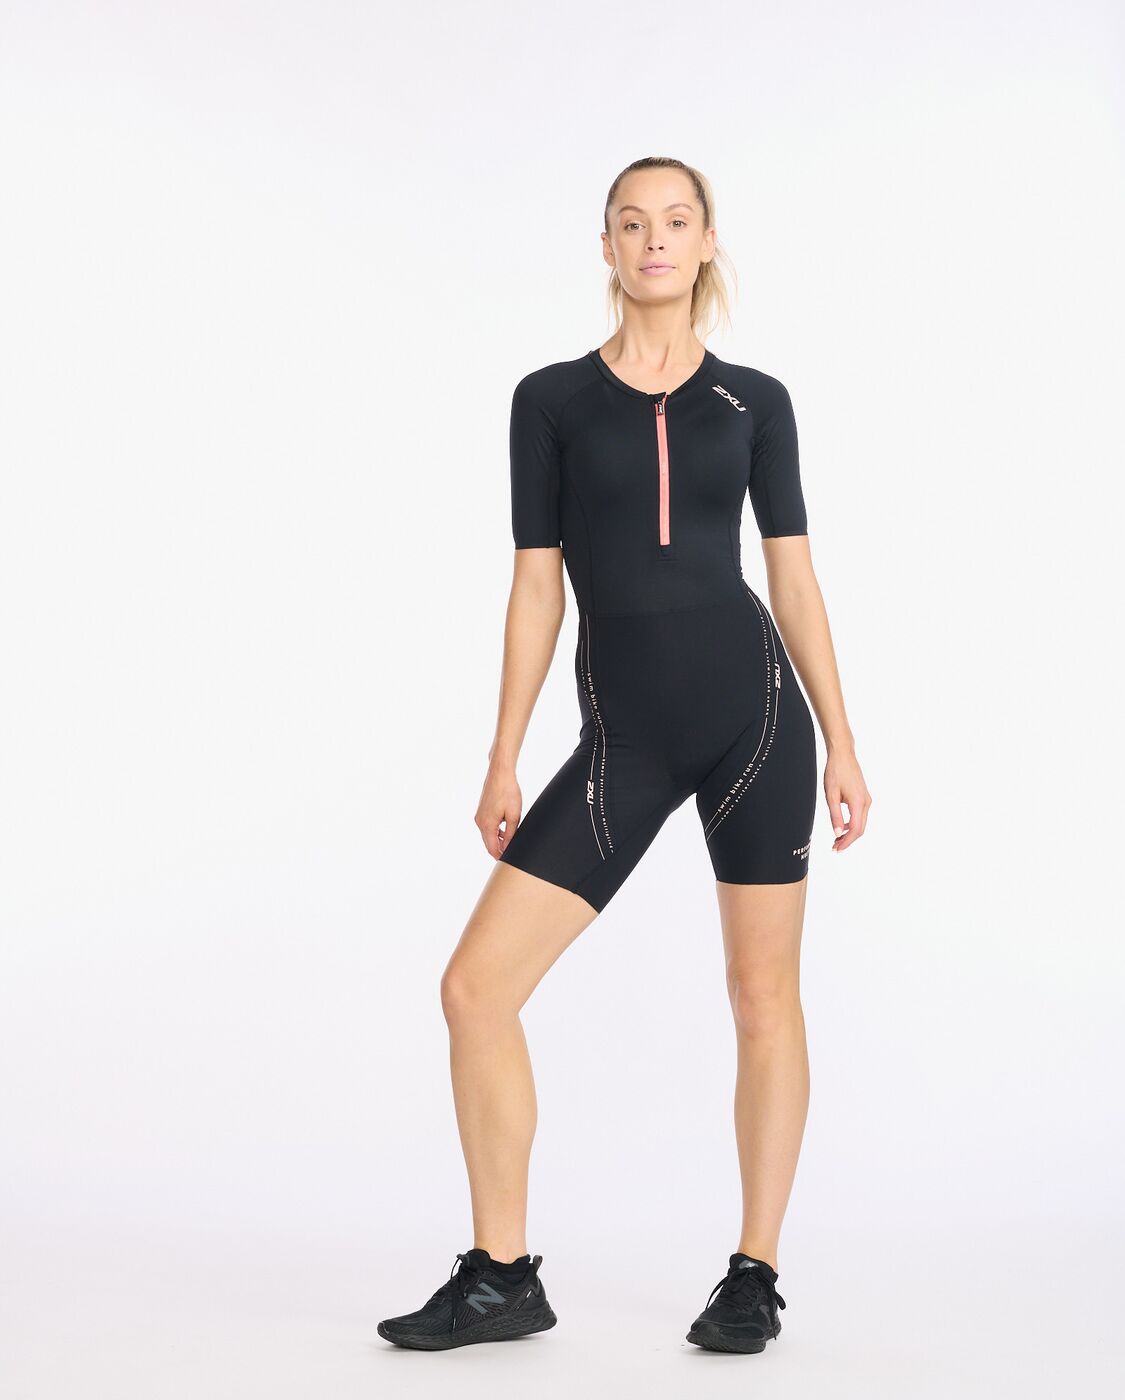 2XU South Africa - Womens Aero Sleeved Trisuit - Black/Hyper Coral